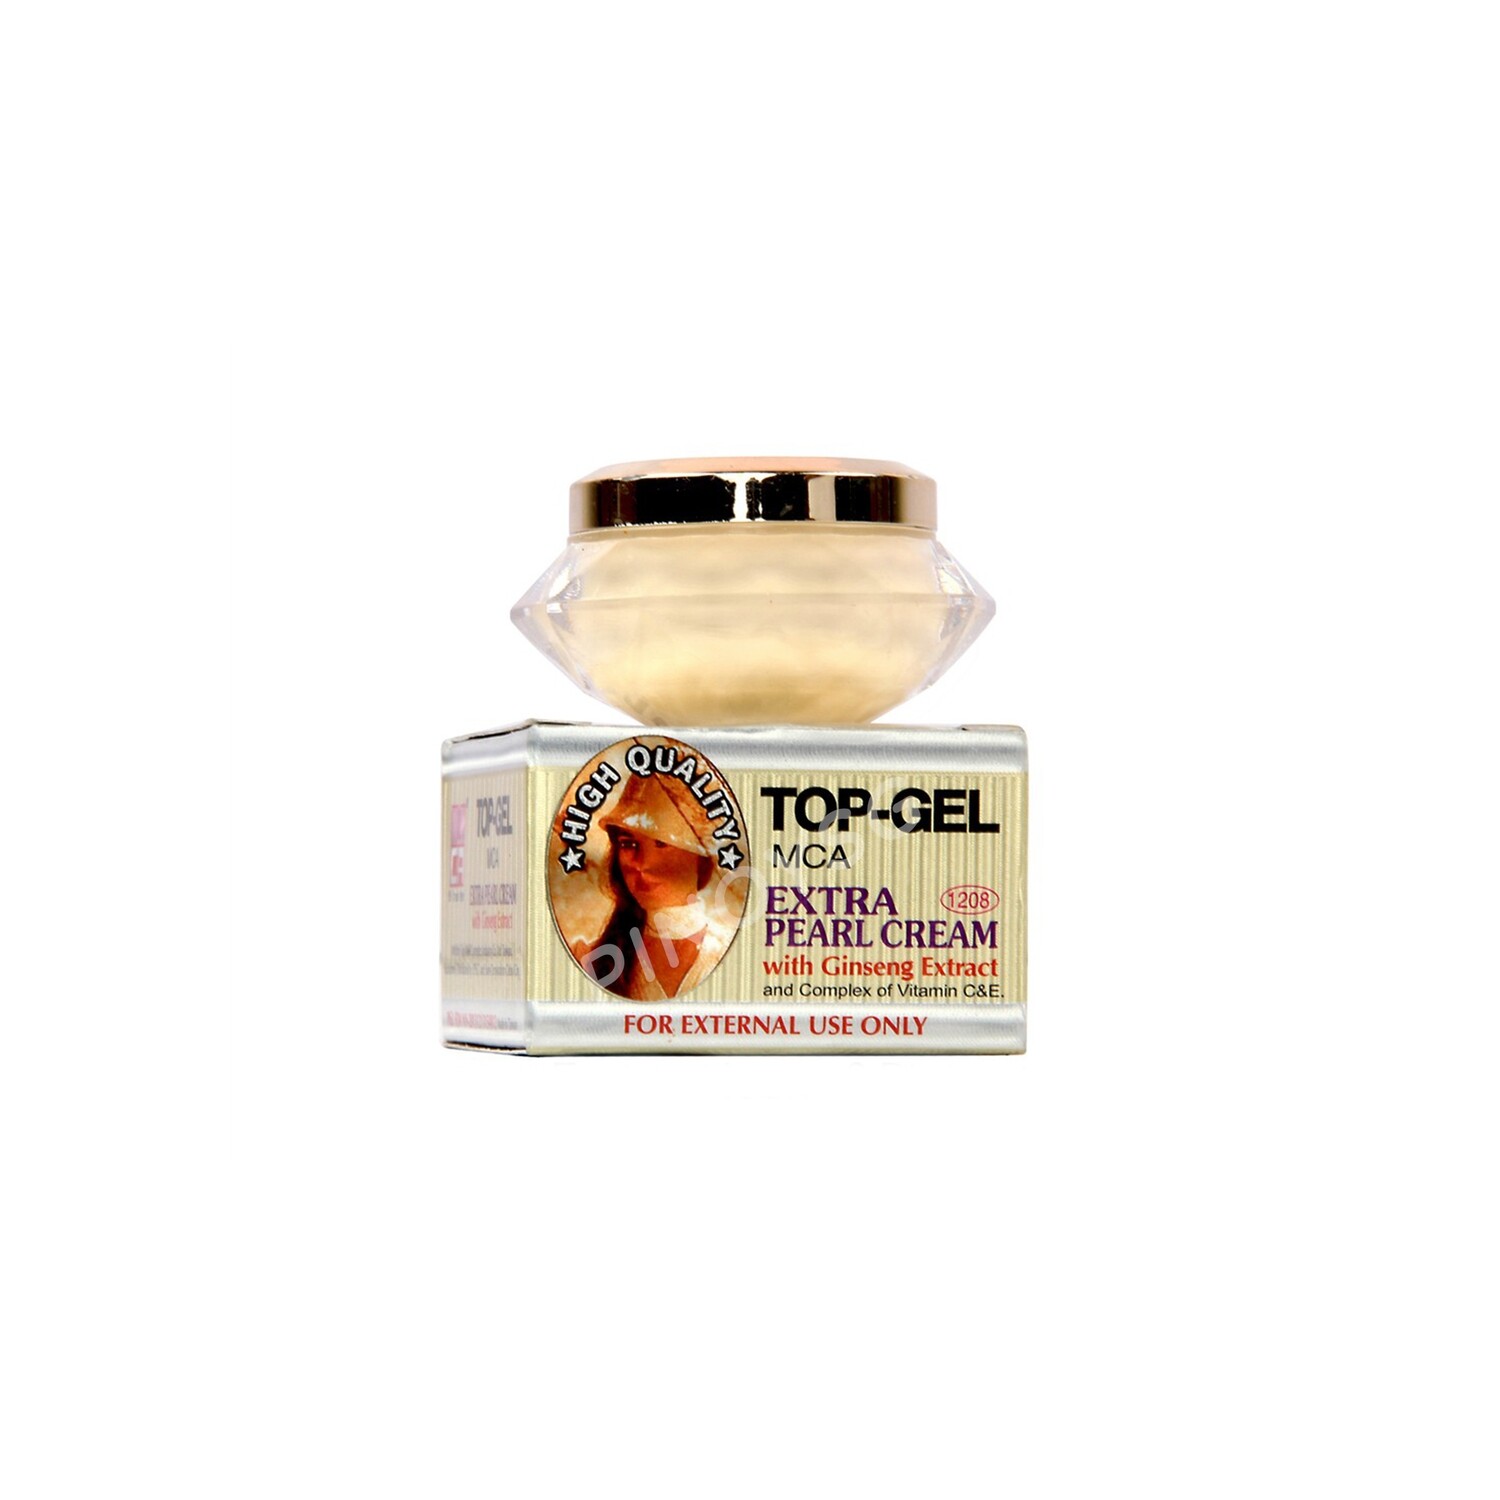 Top-Gel Extra Pearl Cream with Ginseng Extract, 16g